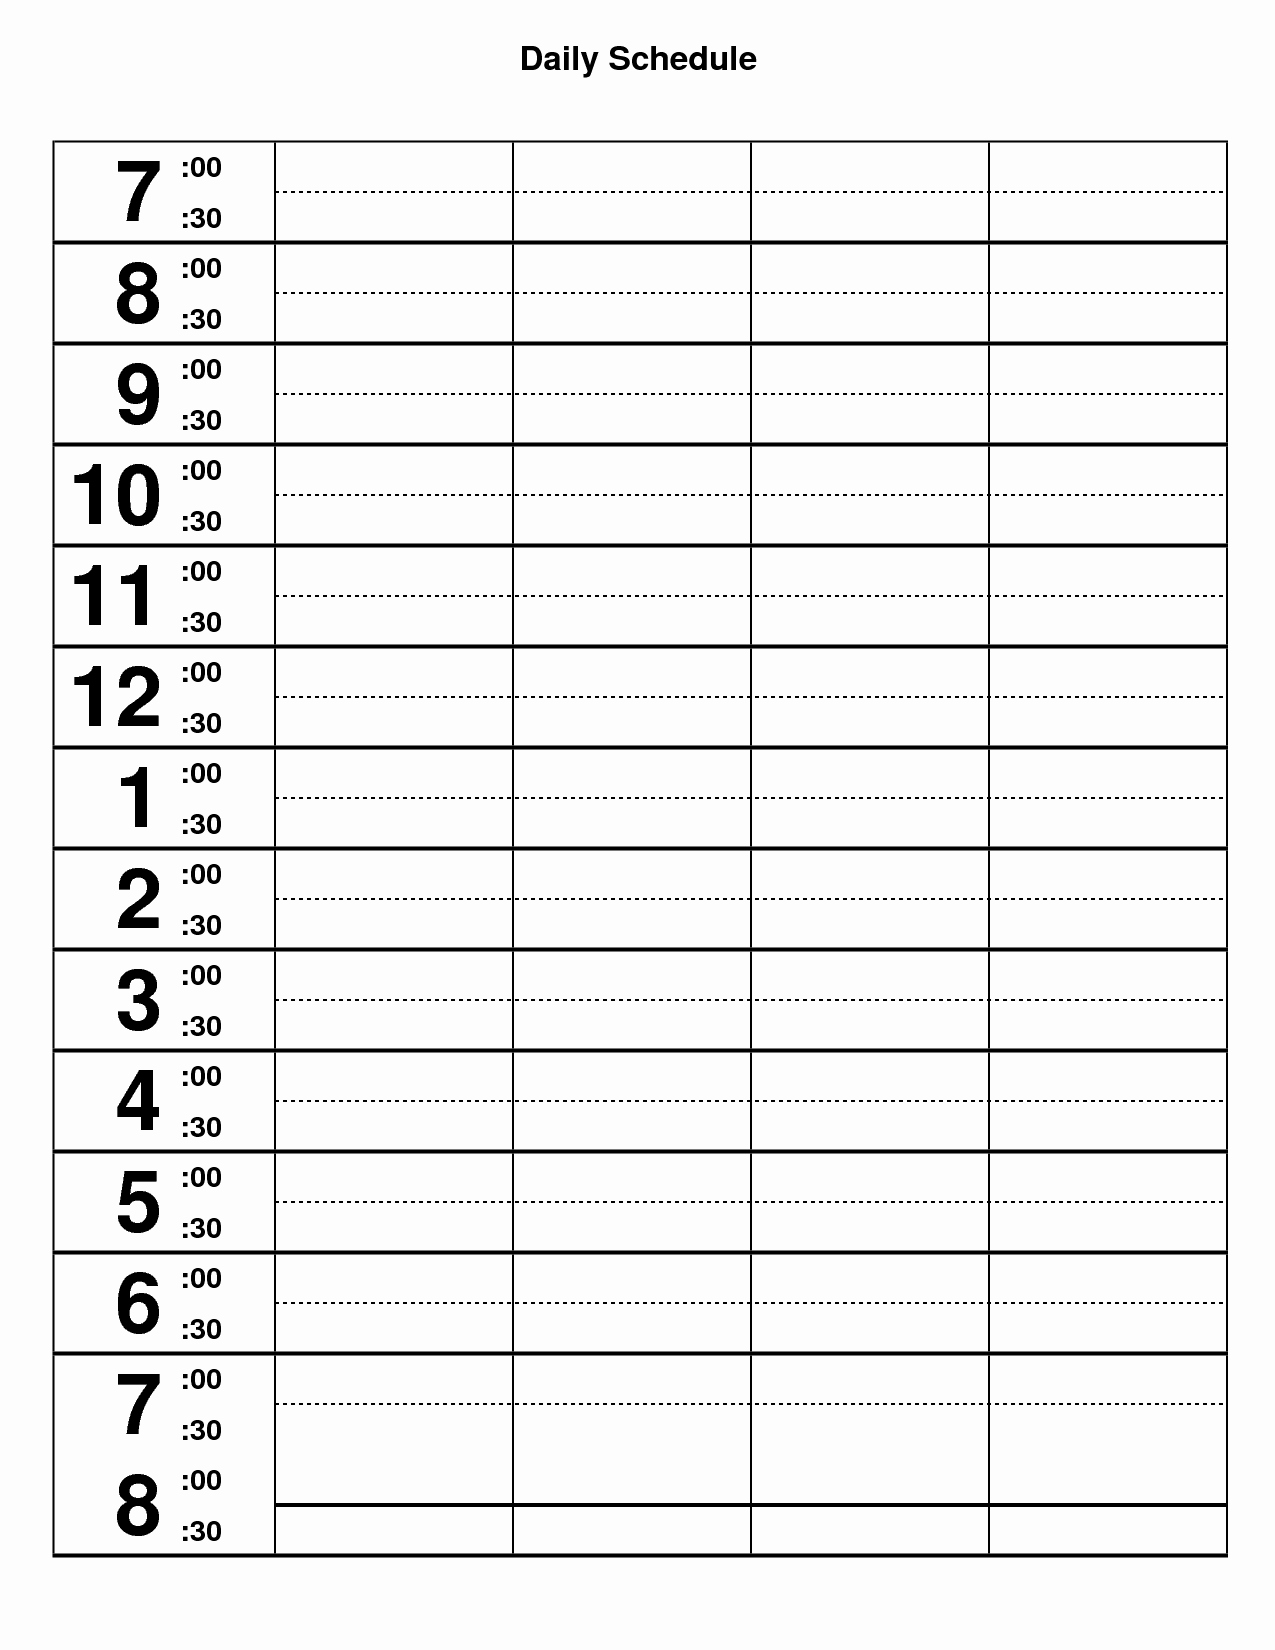 Daily Schedule Template Printable Inspirational 9 Best Of Daily Schedule Template Printable Free